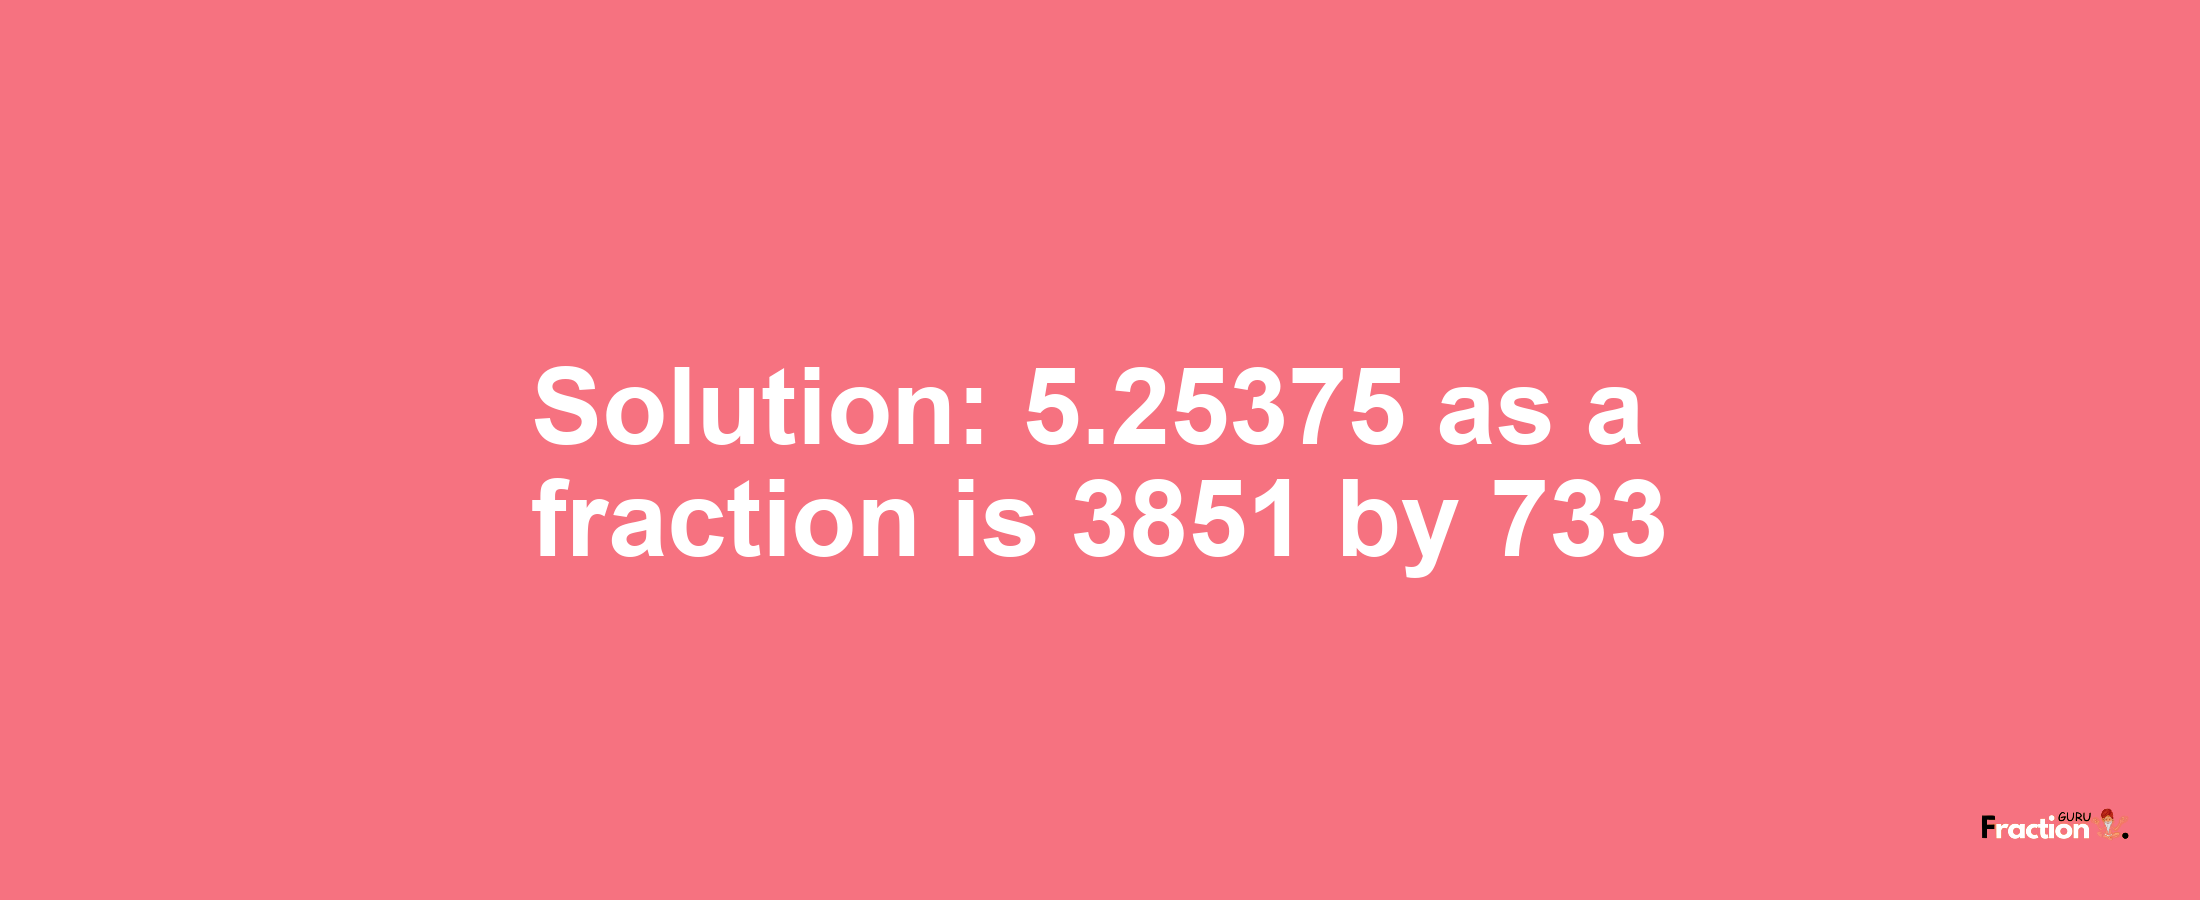 Solution:5.25375 as a fraction is 3851/733